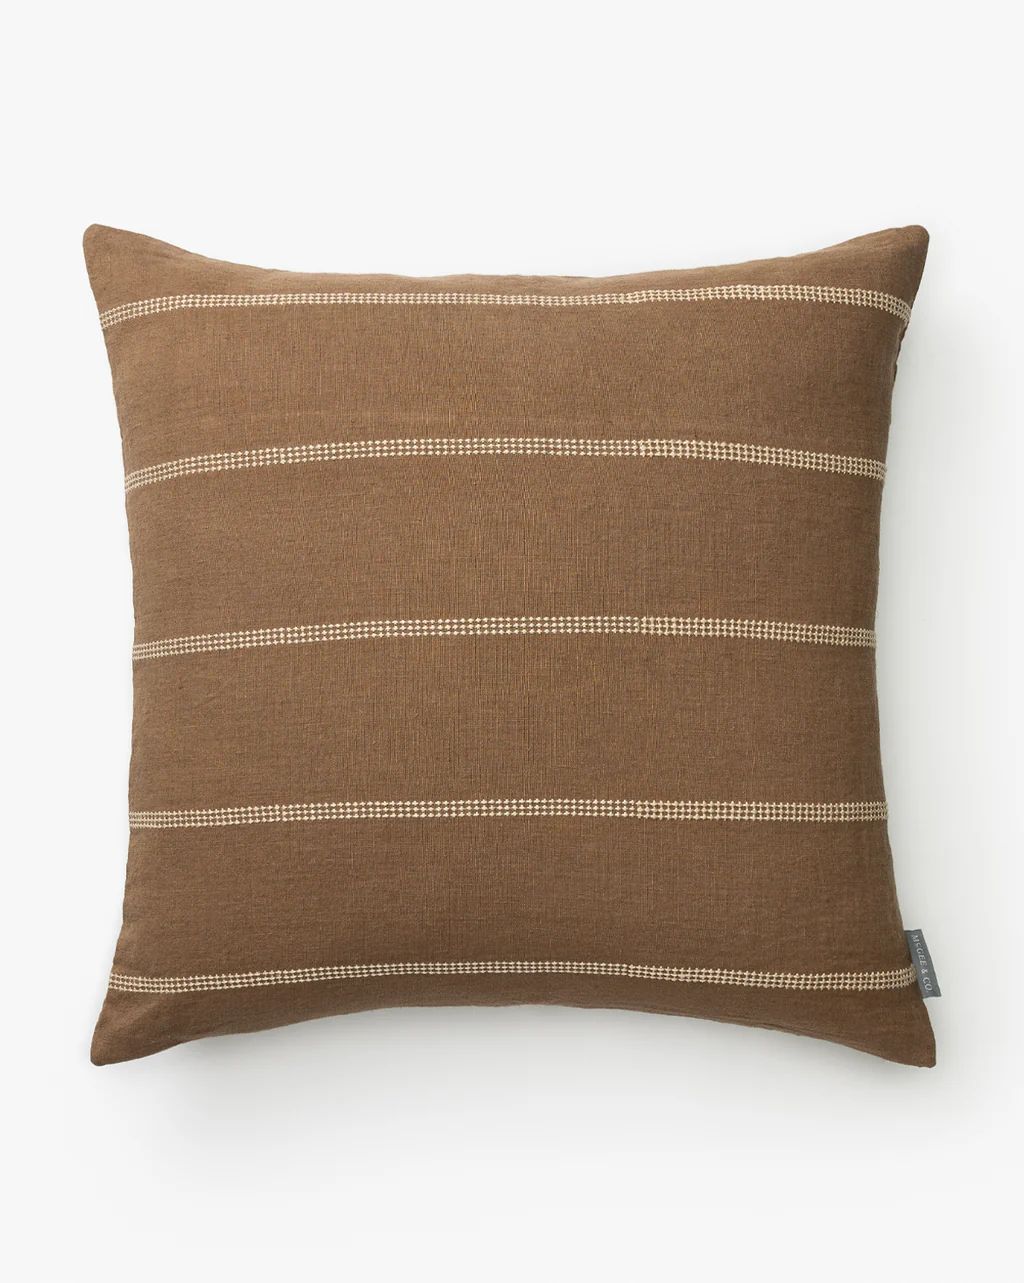 Ryder Pillow Cover | McGee & Co.